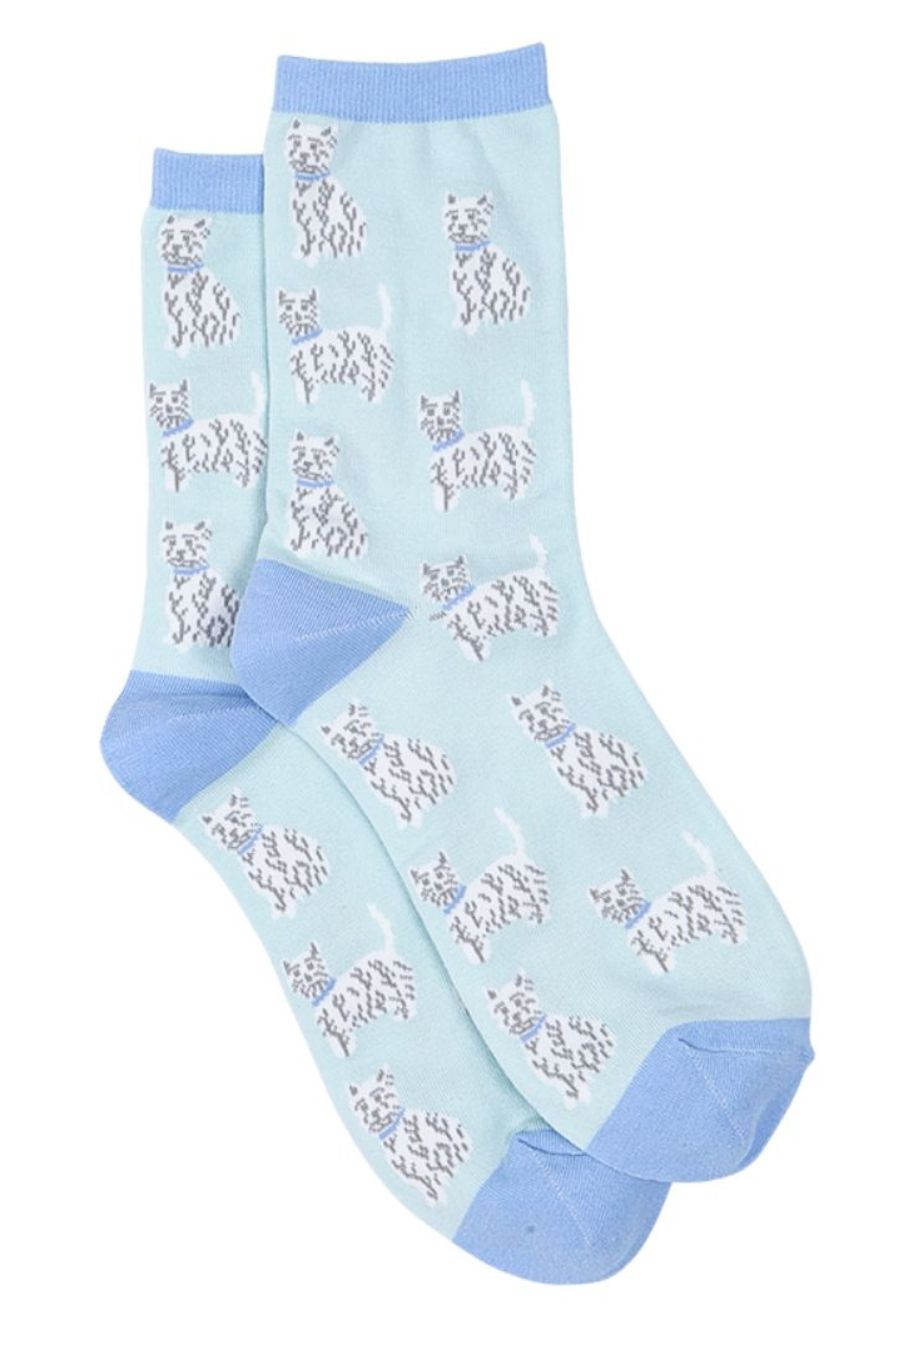 mint green and blue ankle socks with white scottie dogs all over